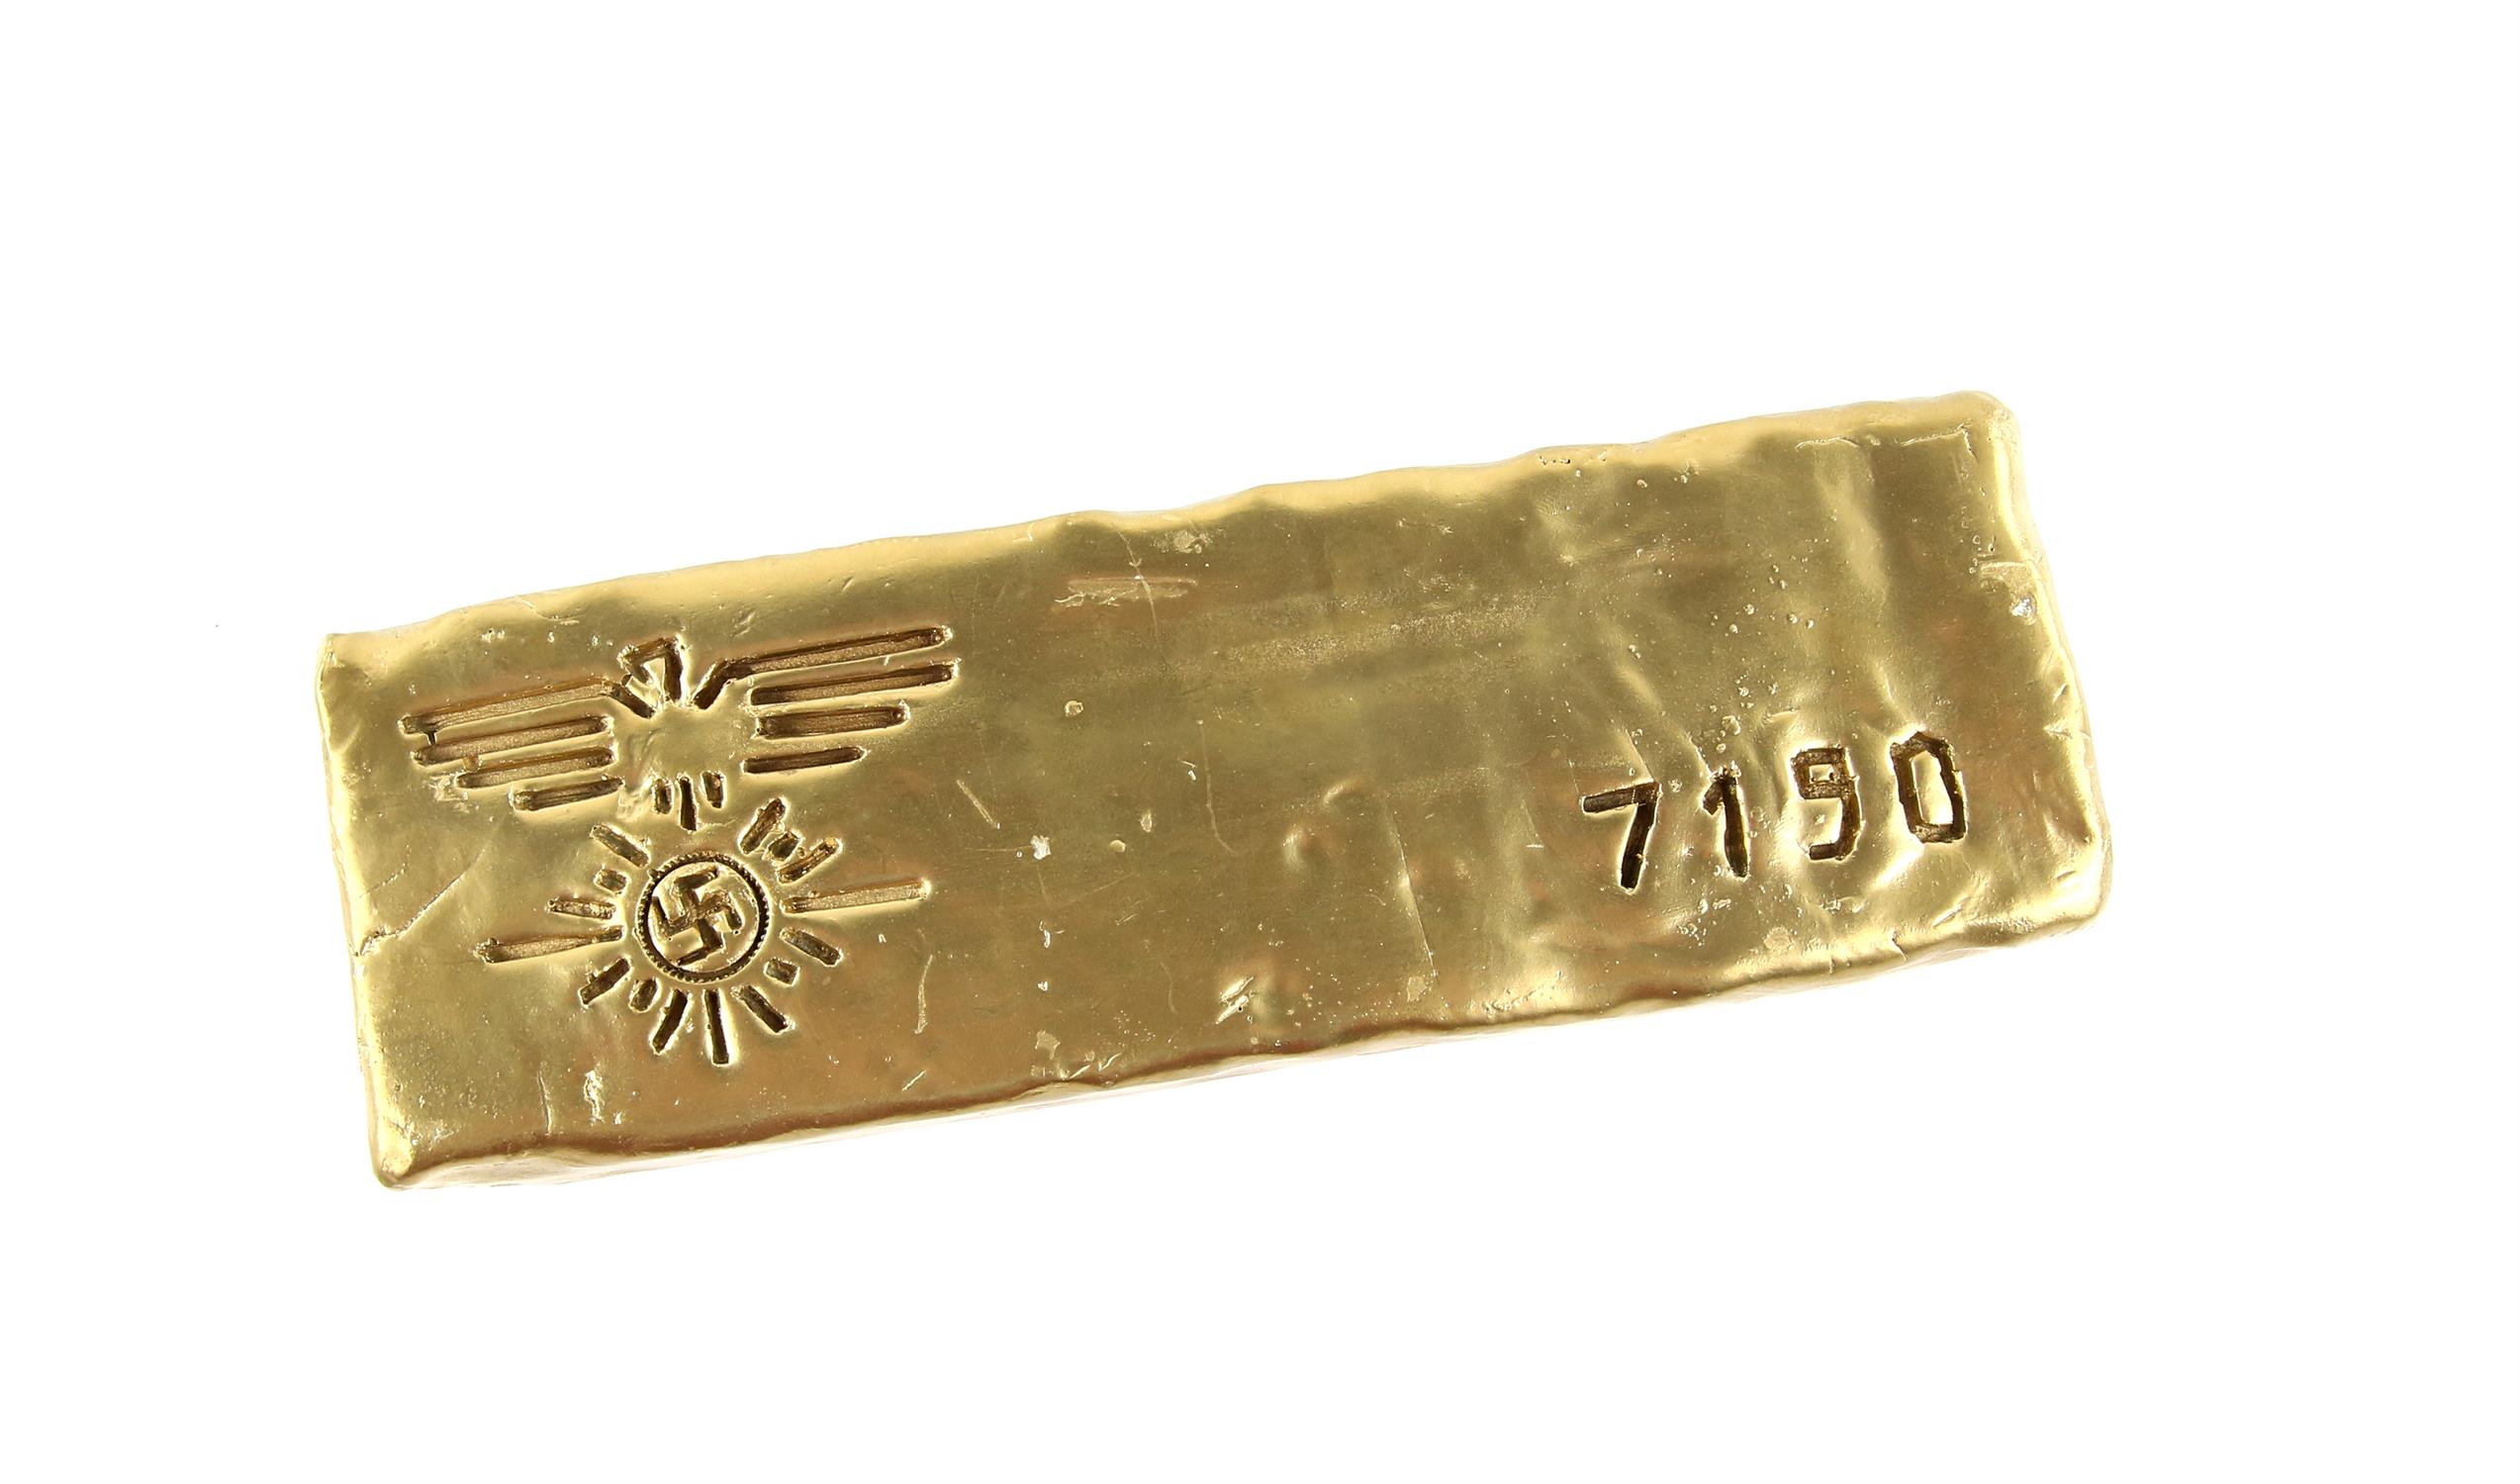 James Bond Goldfinger - Replica gold bar, gold-painted plaster, a prop gold bar of this design is